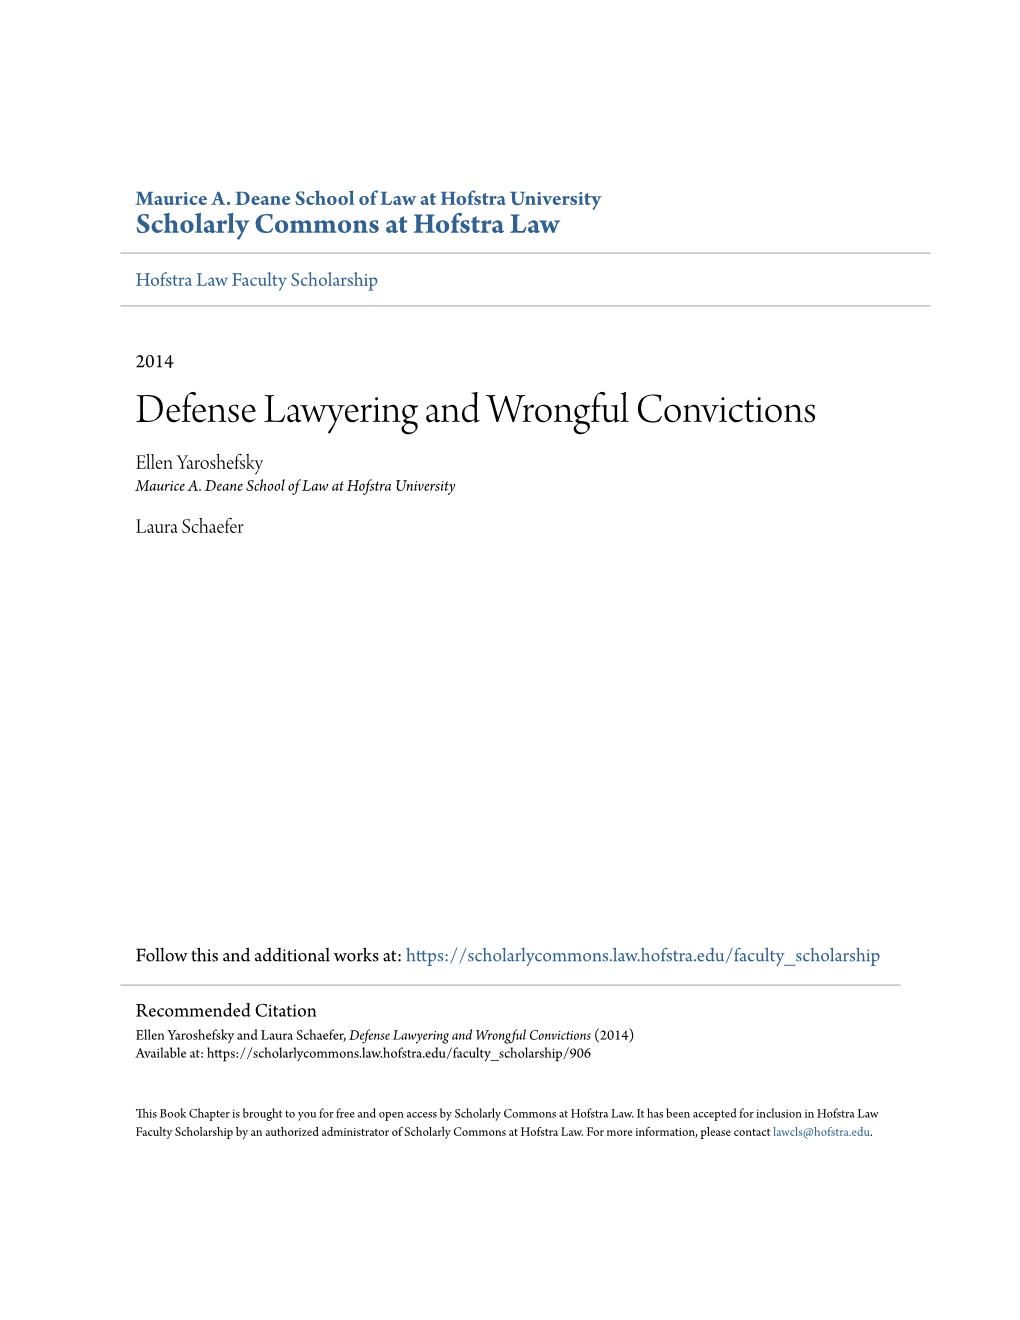 Defense Lawyering and Wrongful Convictions Ellen Yaroshefsky Maurice A